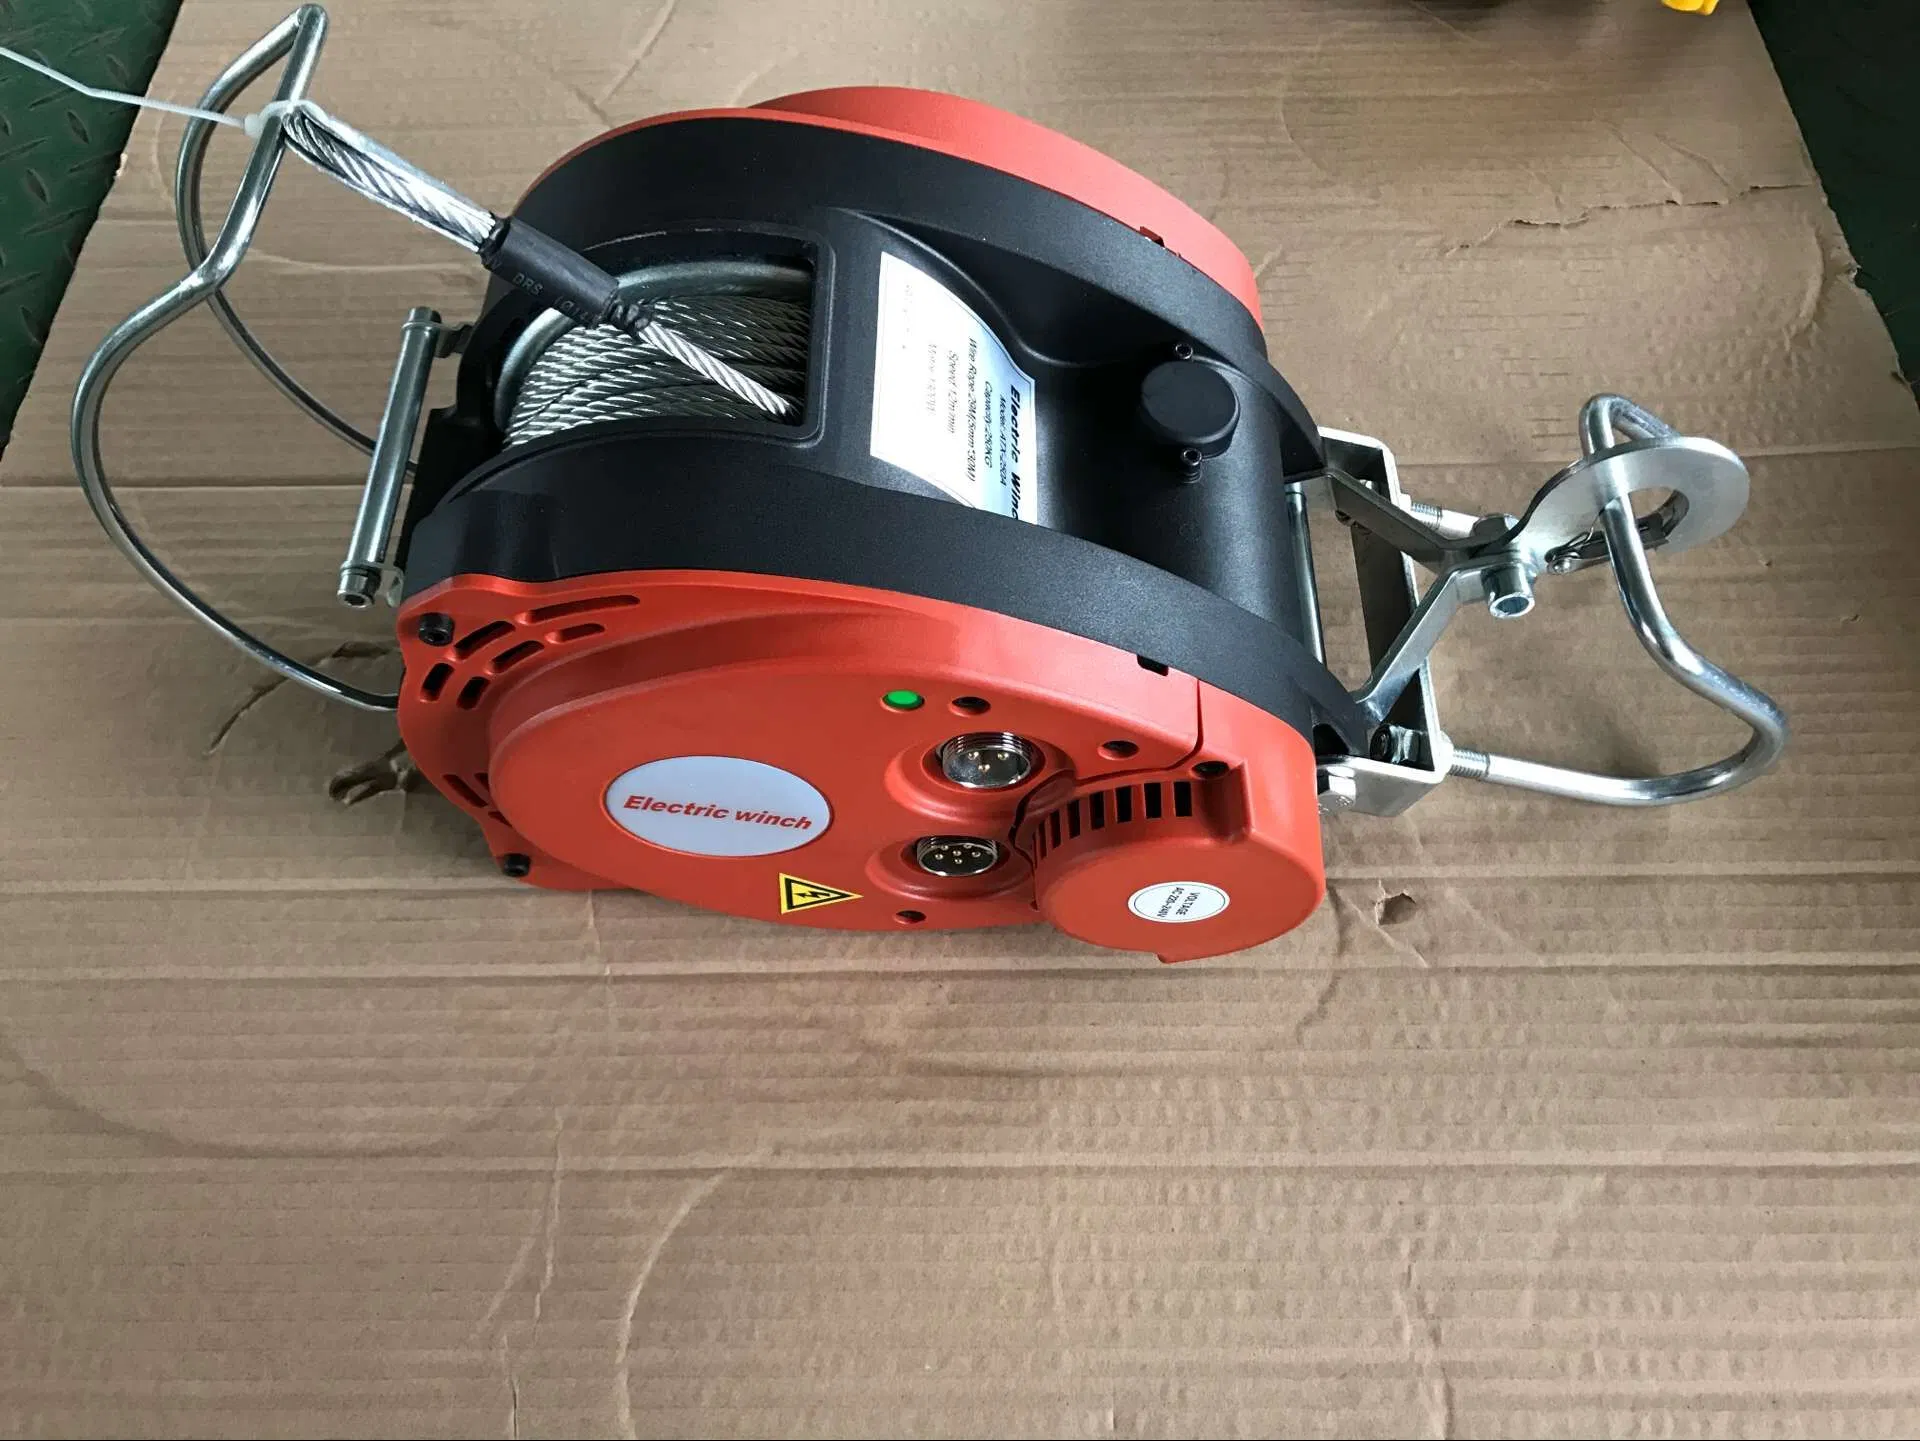 250kg Mini Electric Wire Rope Hoist Supending Electric Winch for Sale